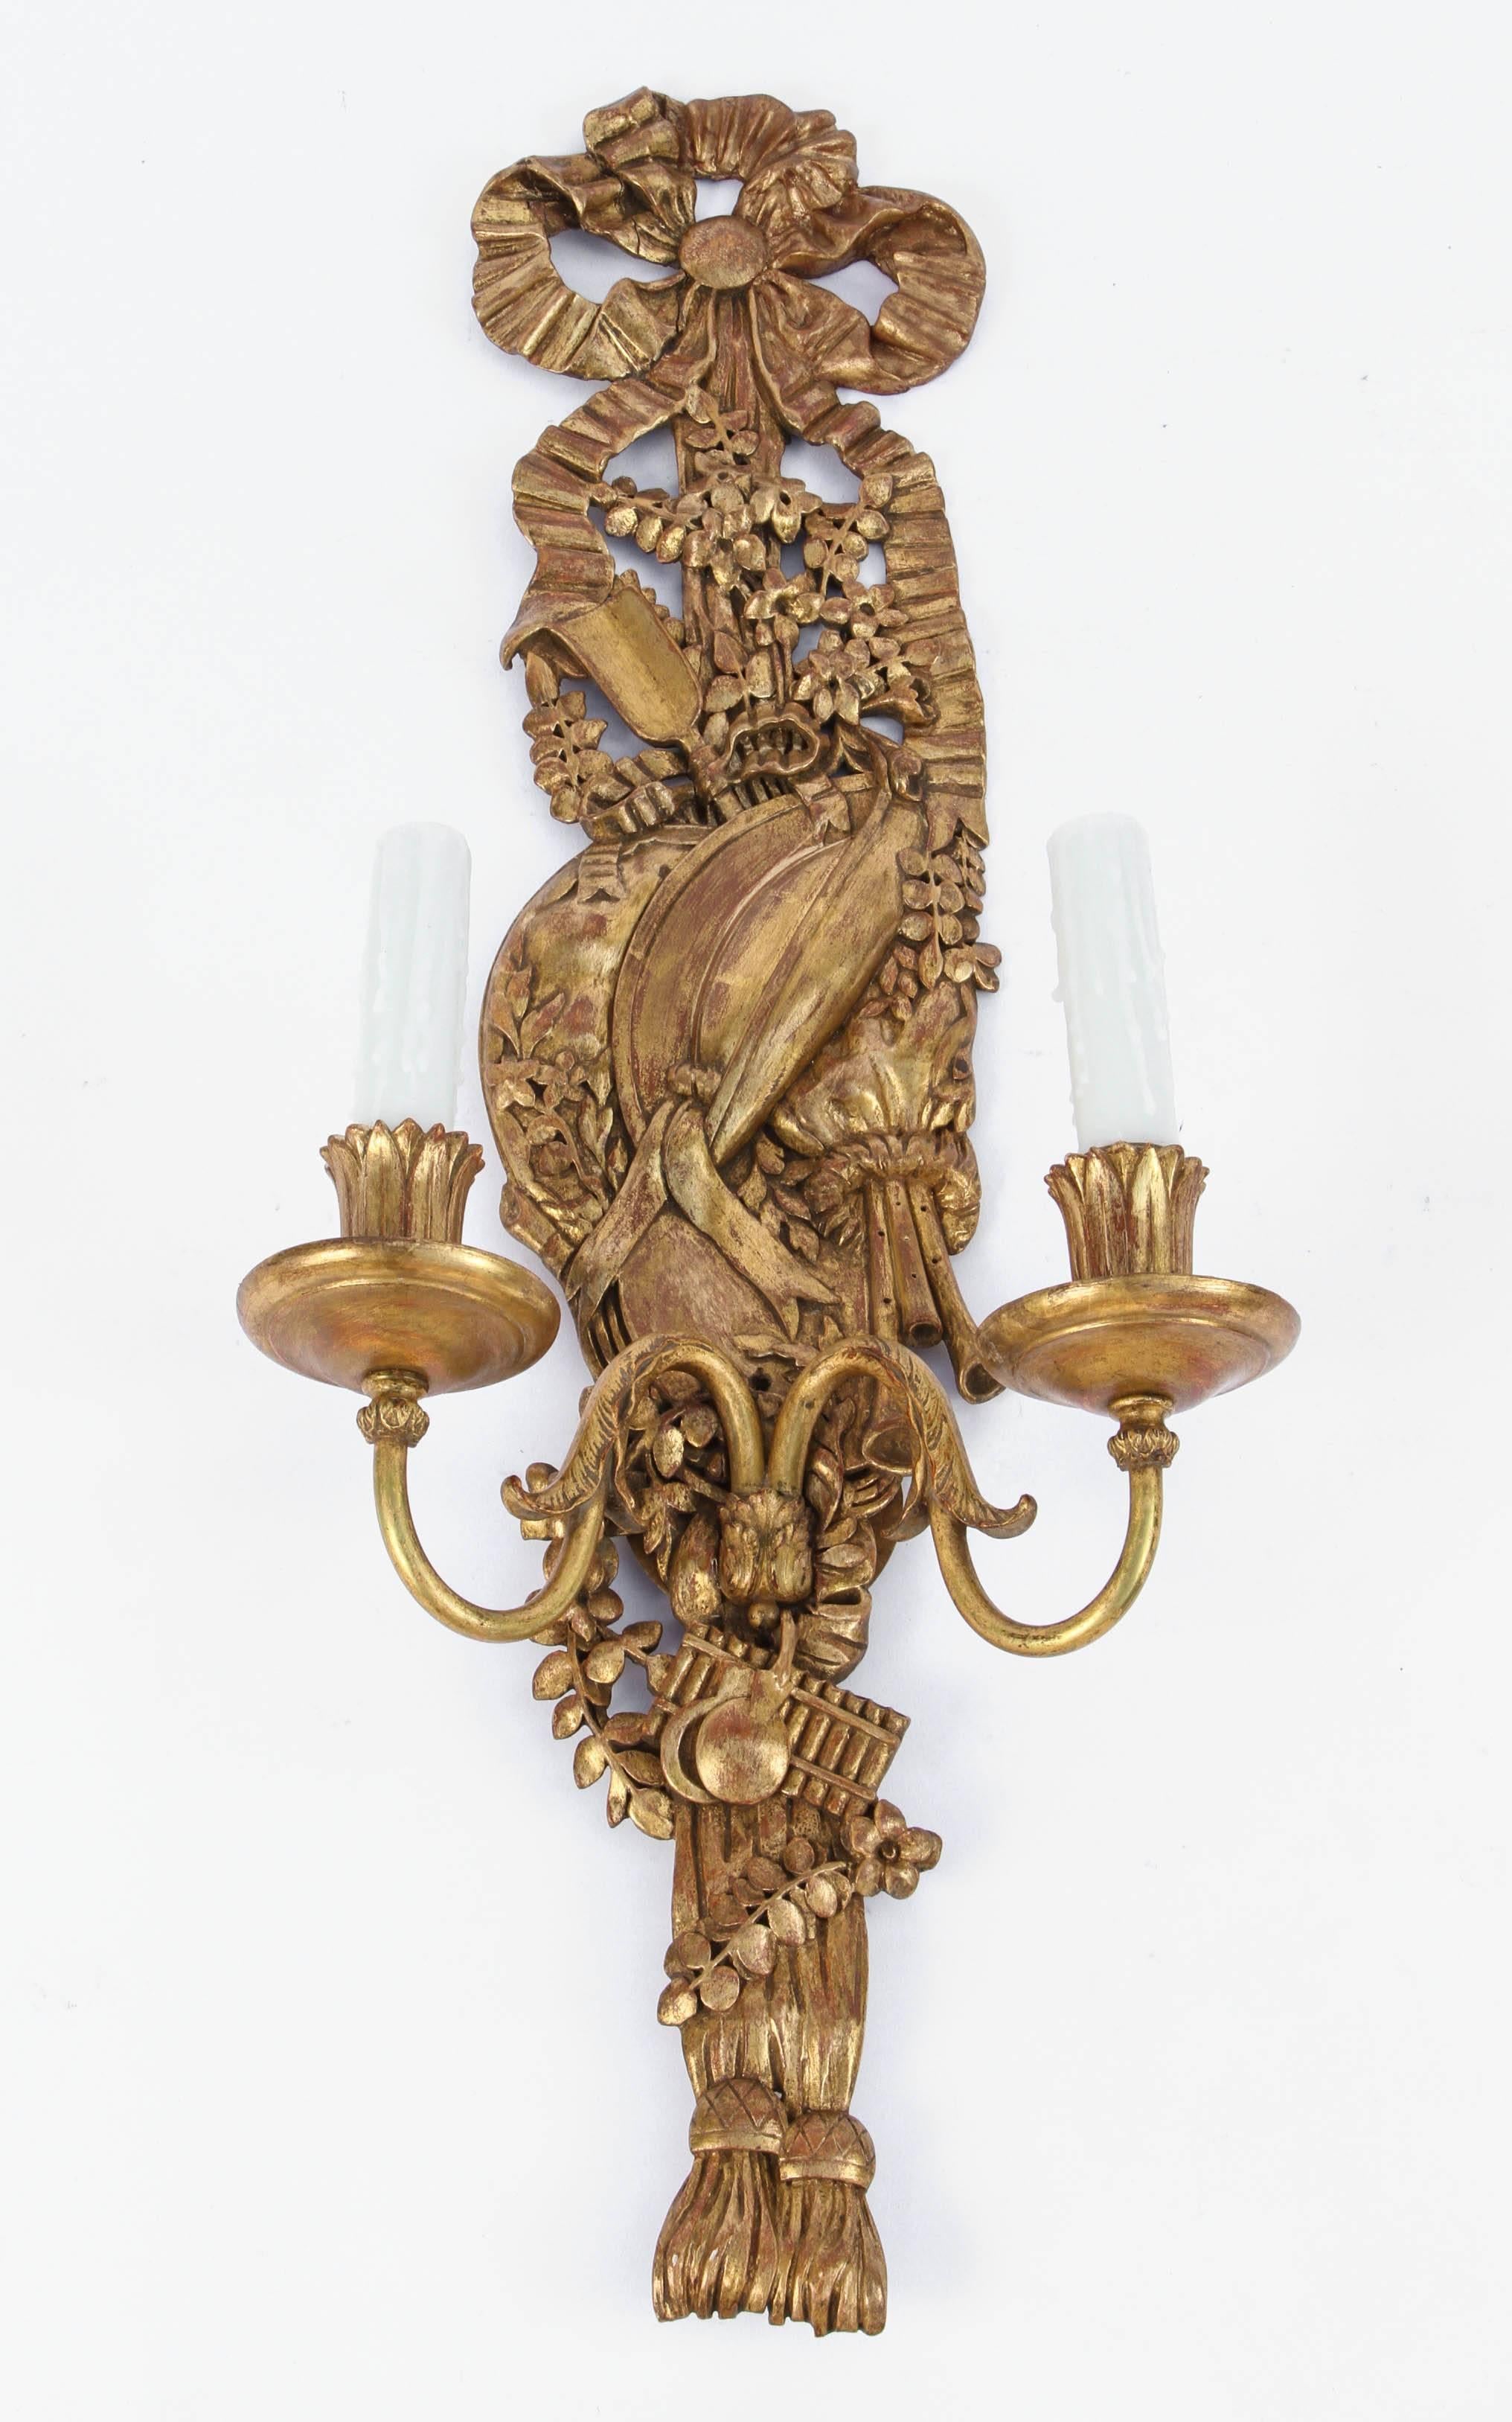 Pair of finely carved Italian giltwood and bronze sconces with bow and tassel motif. The sconces have been newly wired. They are priced as a pair.